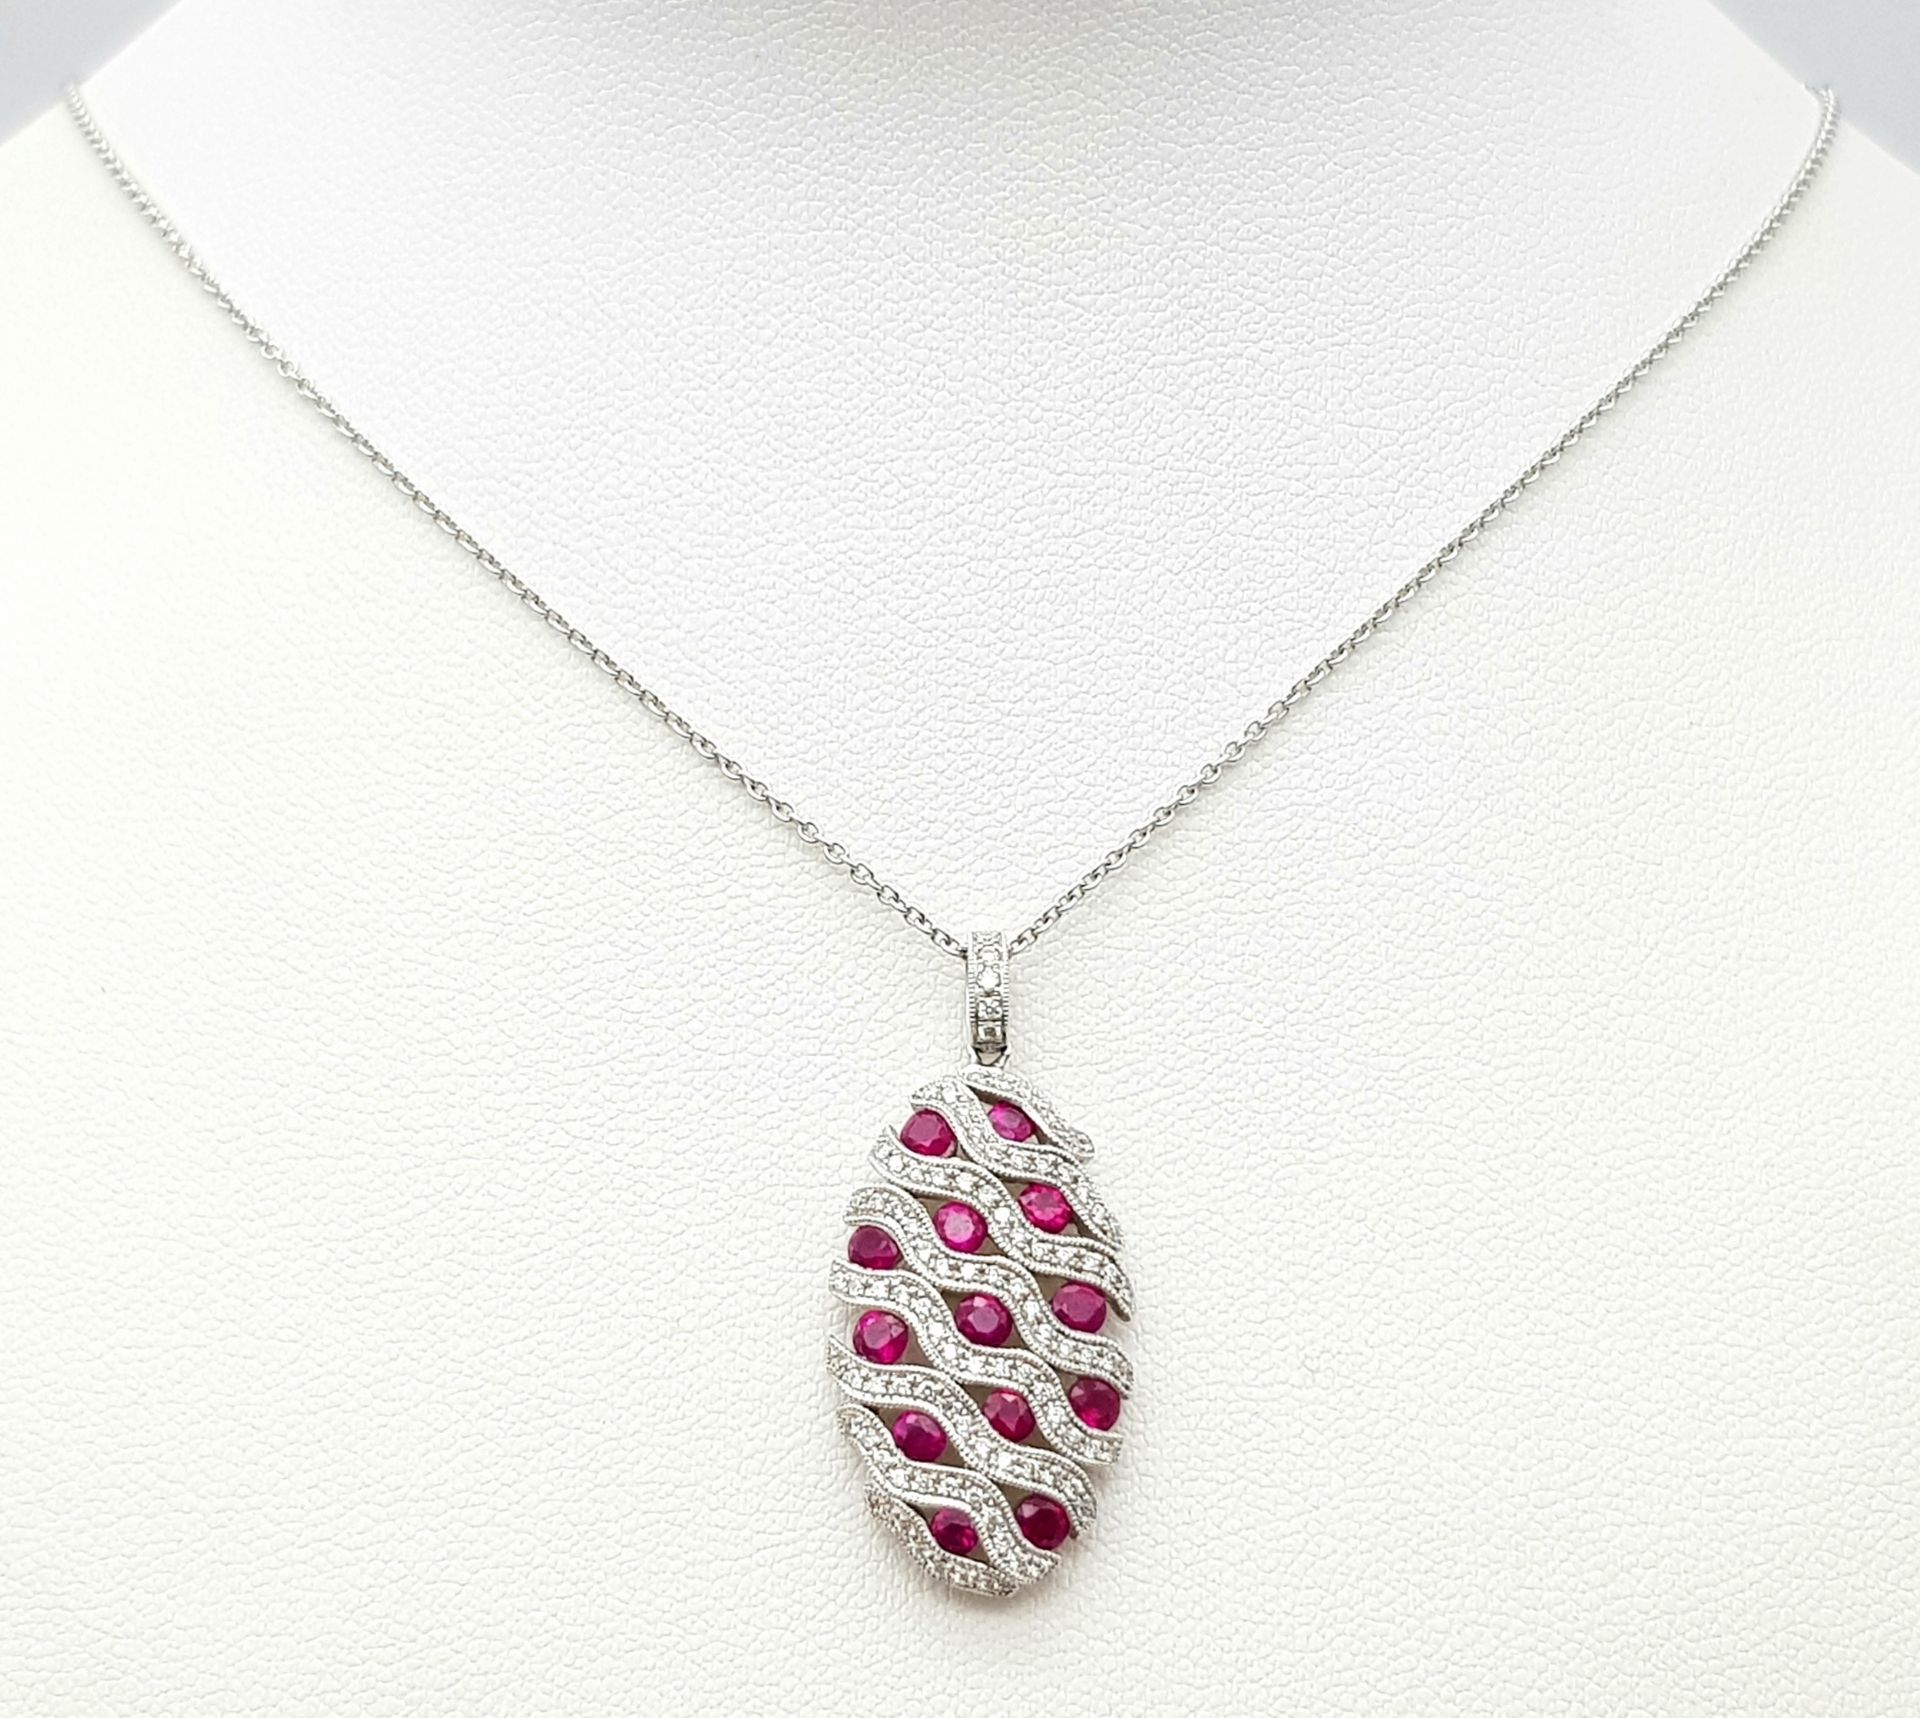 AN 18K WHITE GOLD DIAMOND AND RUBY PENDANT - 0.49CT OF DIAMONDS AND 2.29CT OF RUBIES. 6.2G WEIGHT. - Image 8 of 16